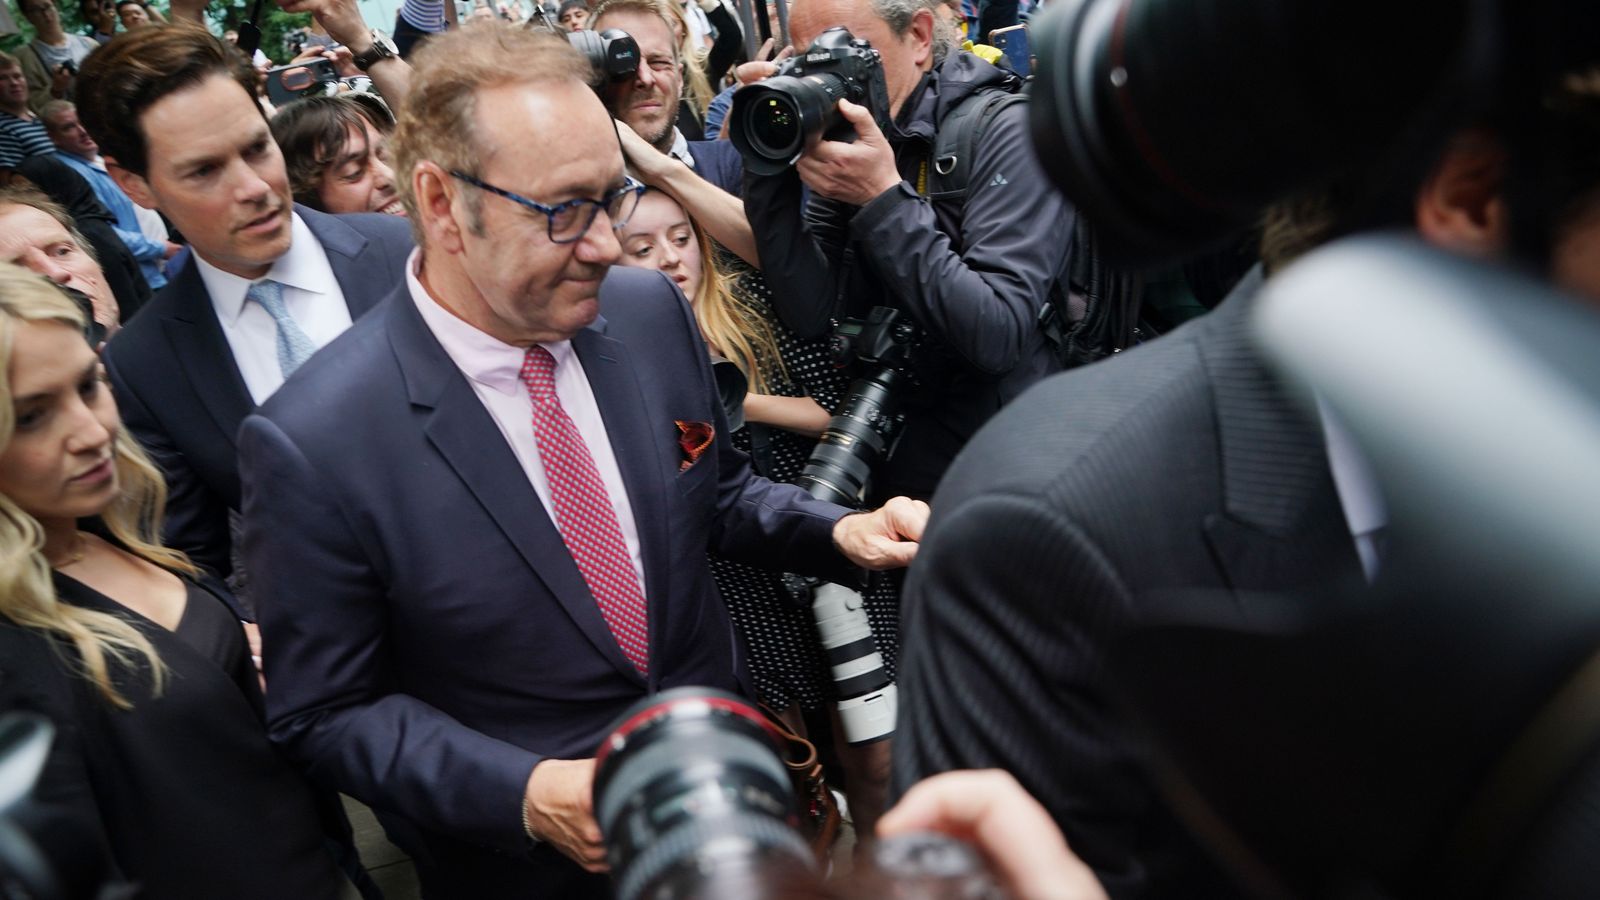 Kevin Spacey: 'Humbled' actor found not guilty of sexual offences against four men